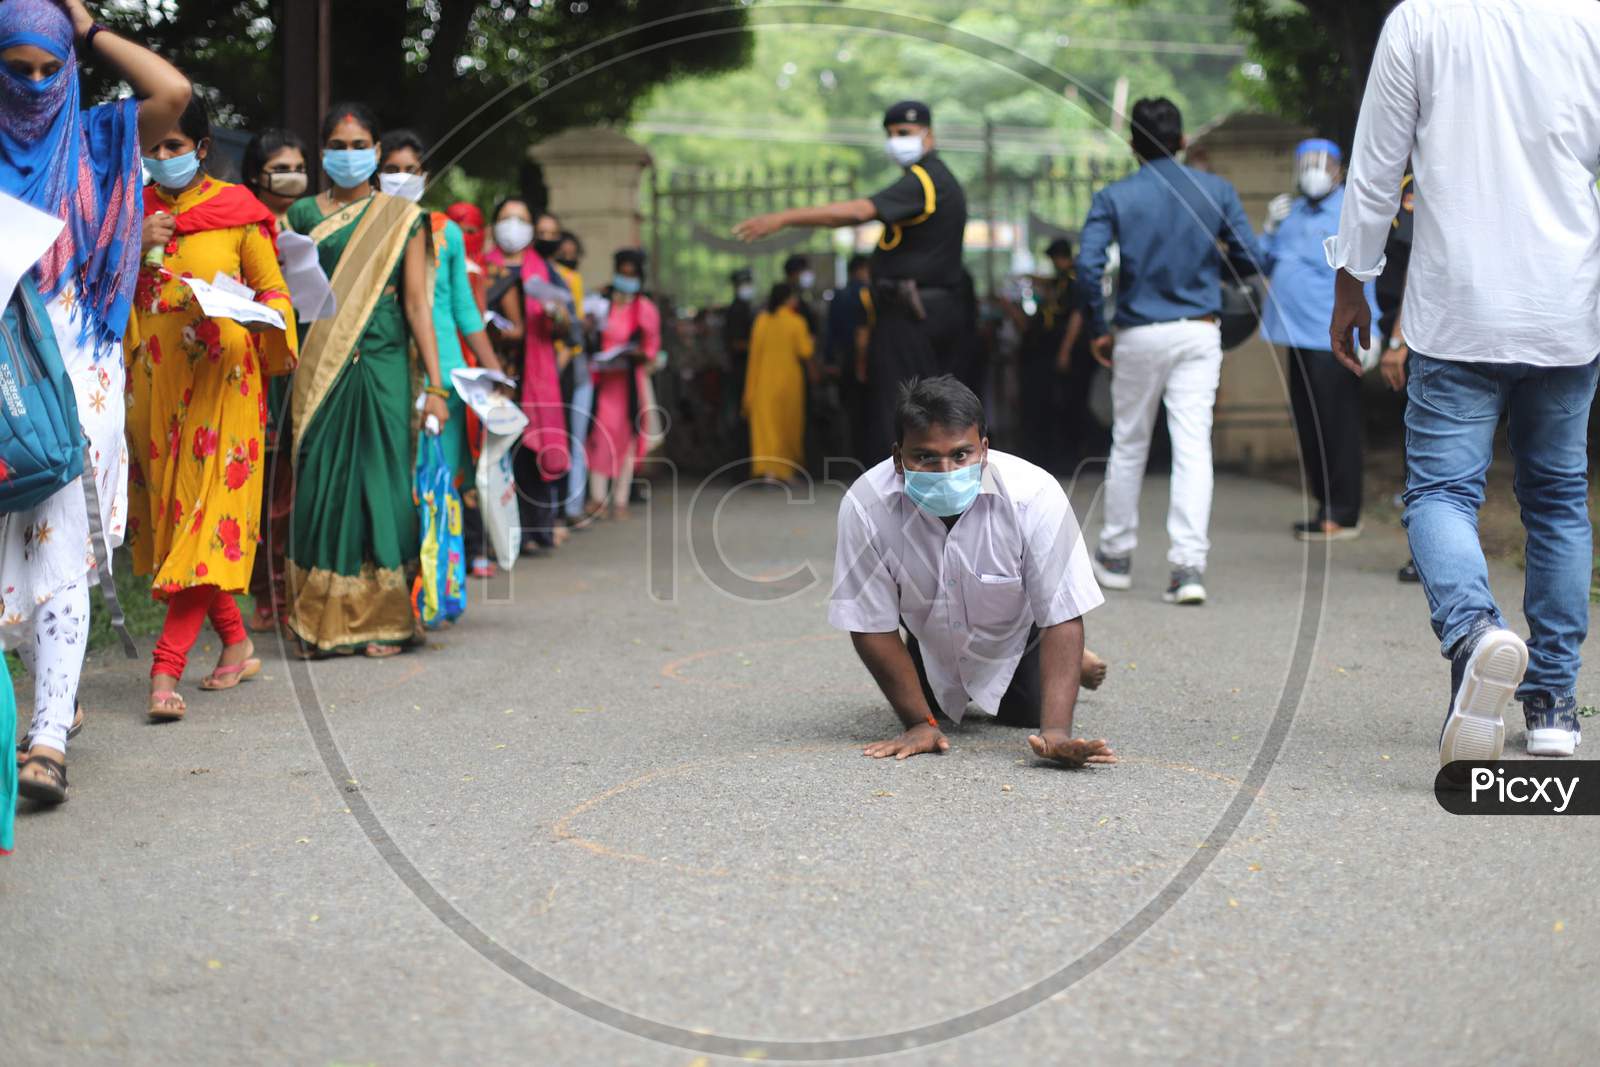 A differently abled Applicant Arrives To Attend B Ed Entrance Examination During Lockdown To Slow The Spread Of The Coronavirus Disease (Covid-19) At Allahabad Central University In Prayagraj, August 9, 2020.